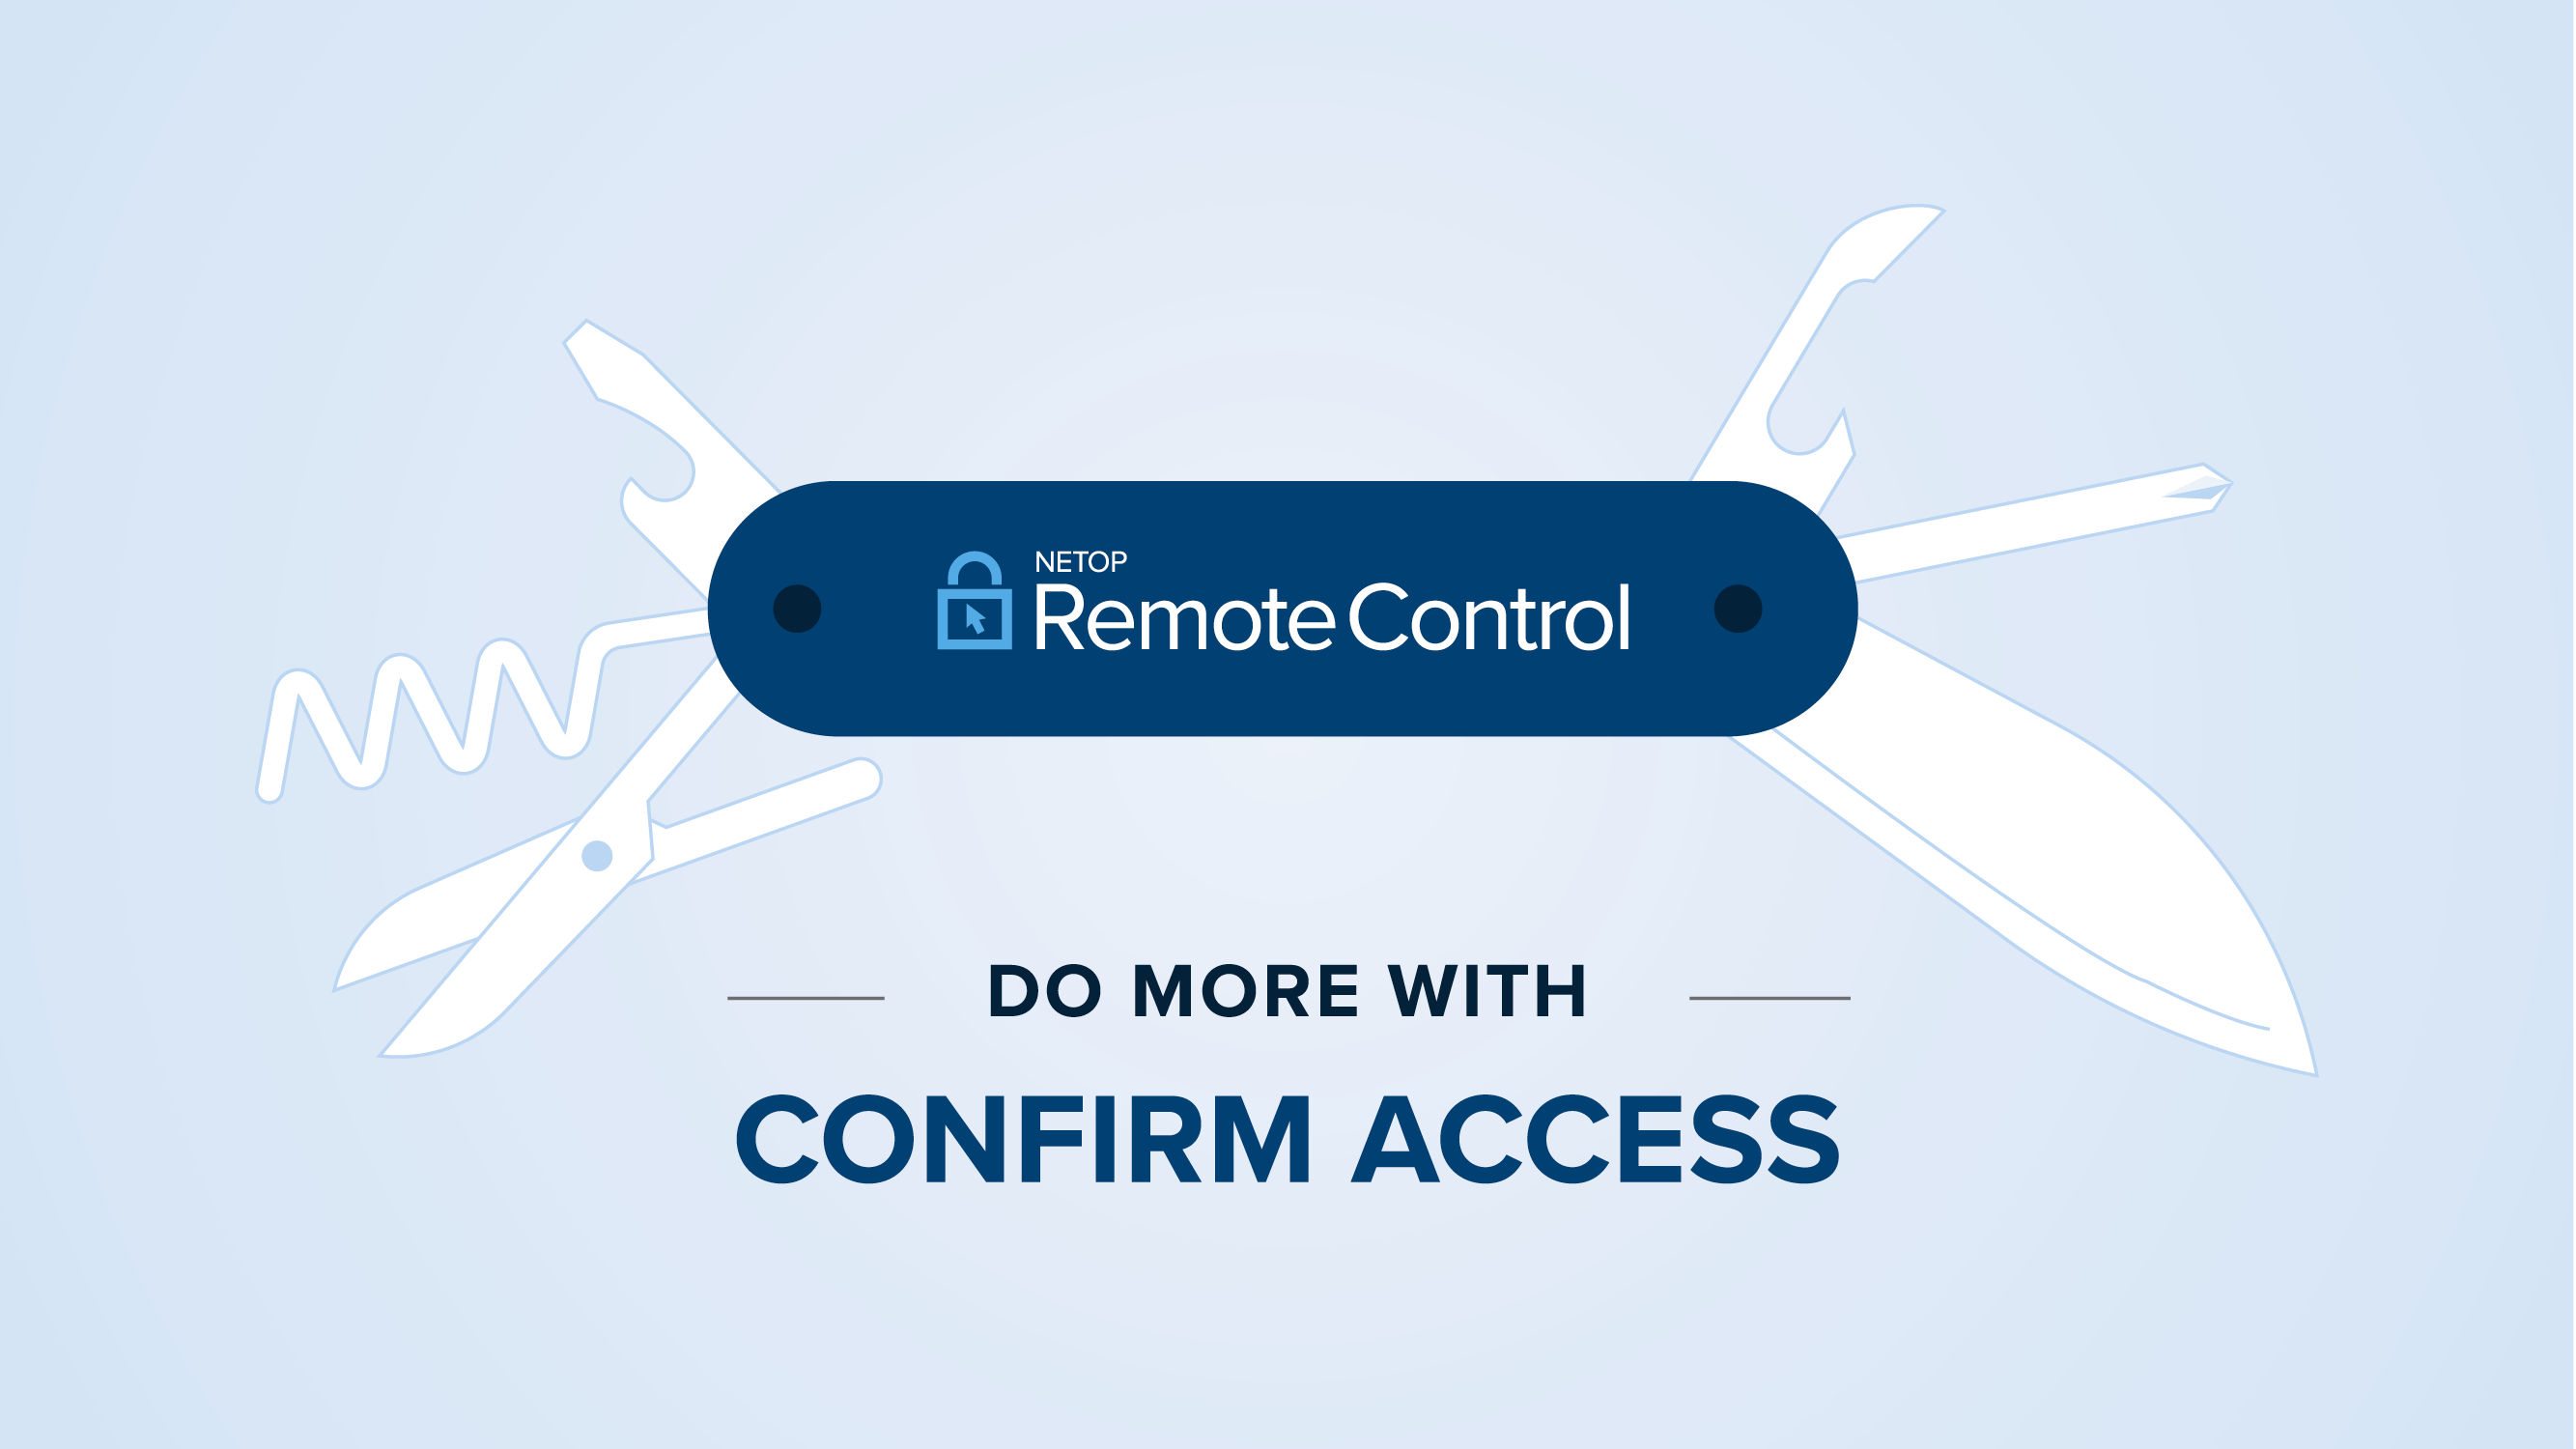 NRC_-_Do_More_With_CONFIRM_ACCESS_Campaign_2020_-_Brighttalk_Thumbnail_Design_640x360px